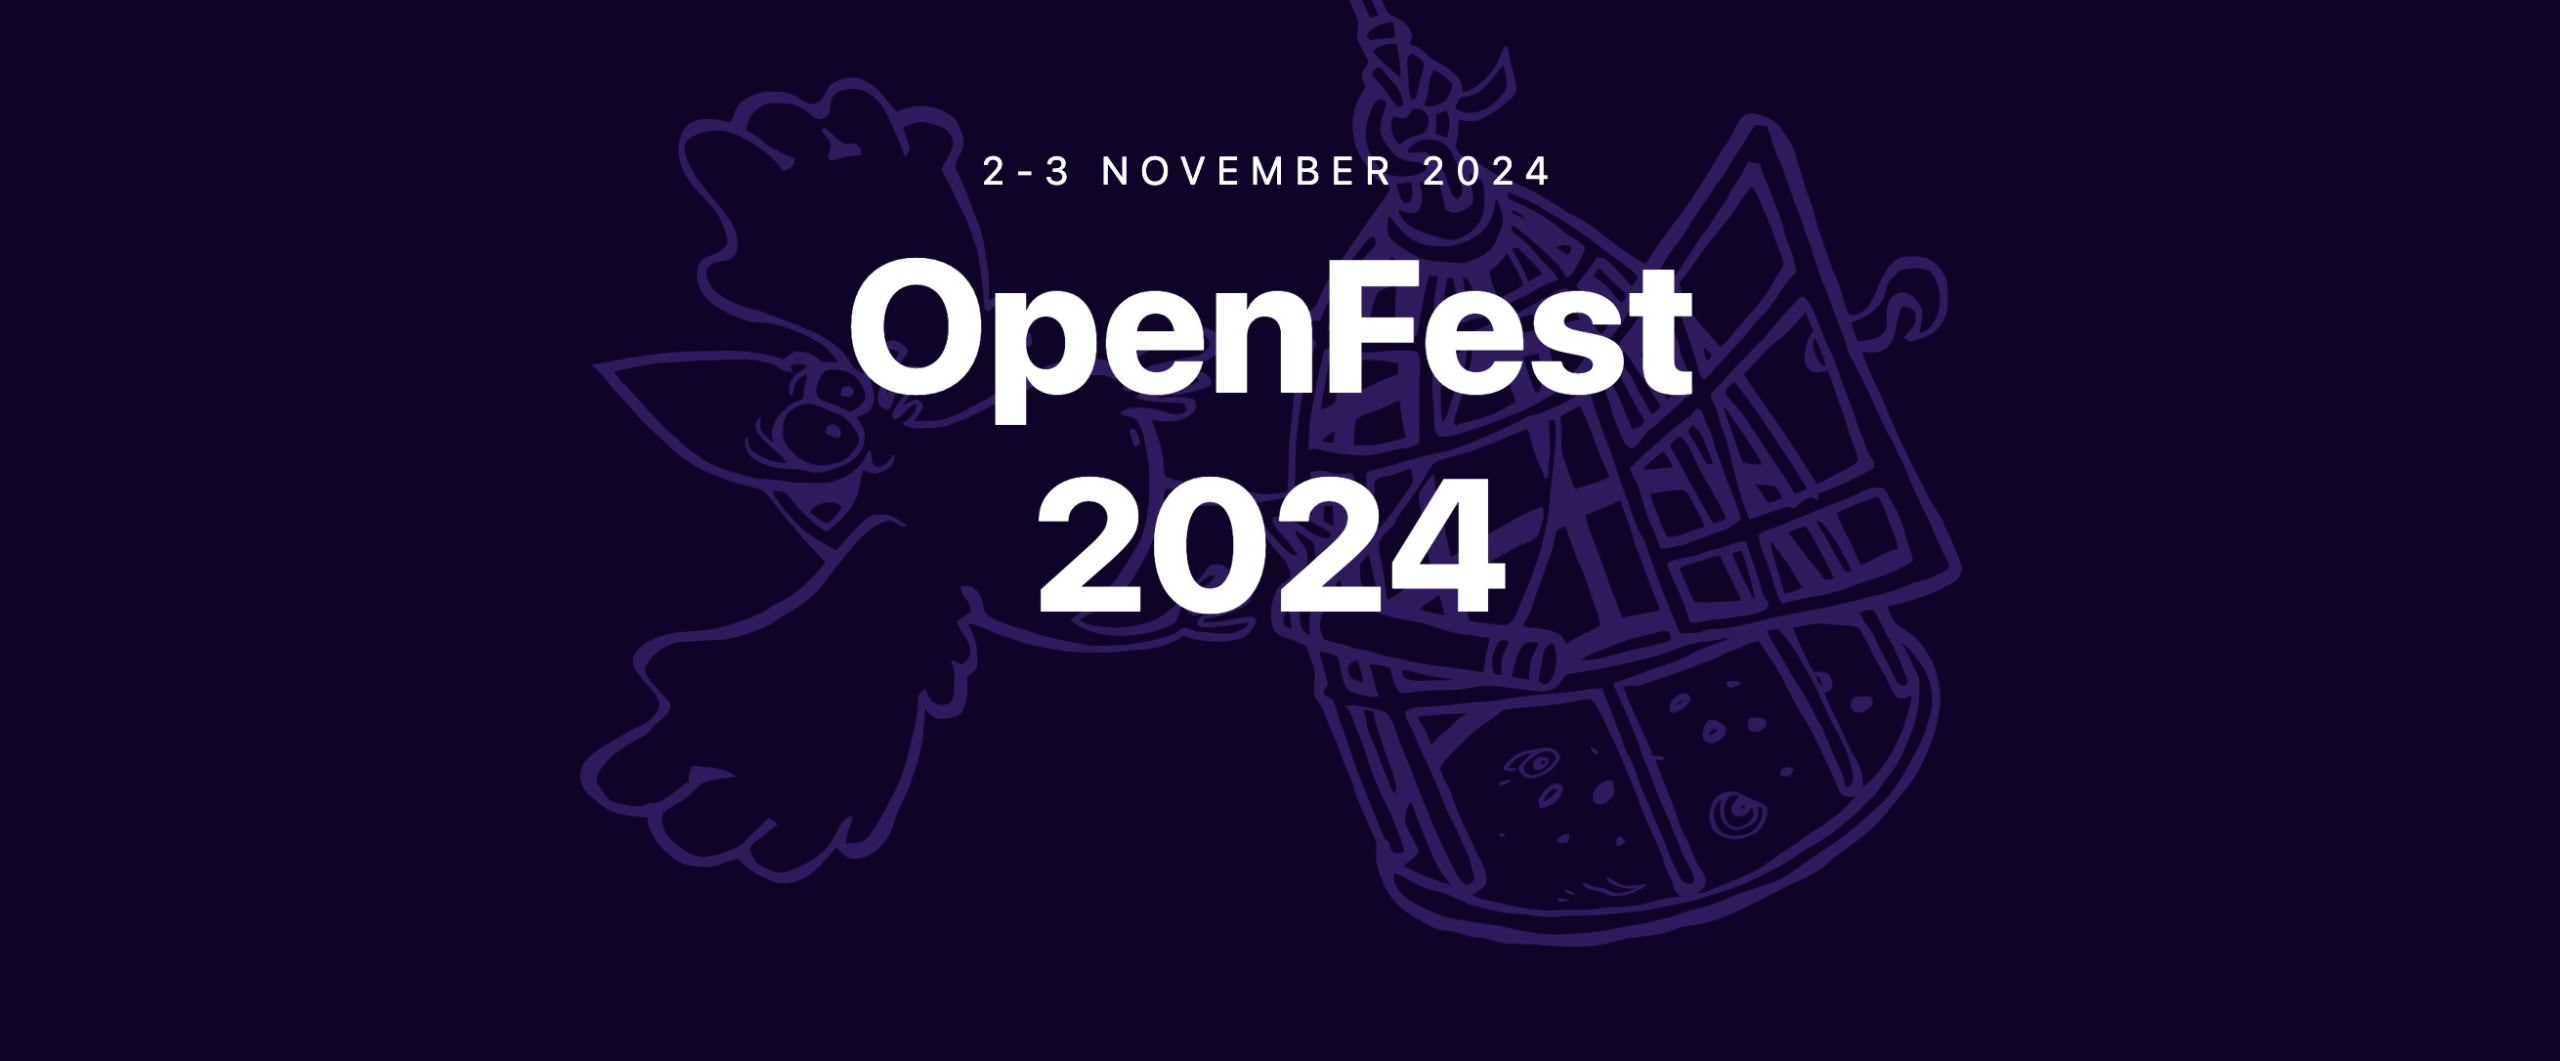 OpenFest 2024